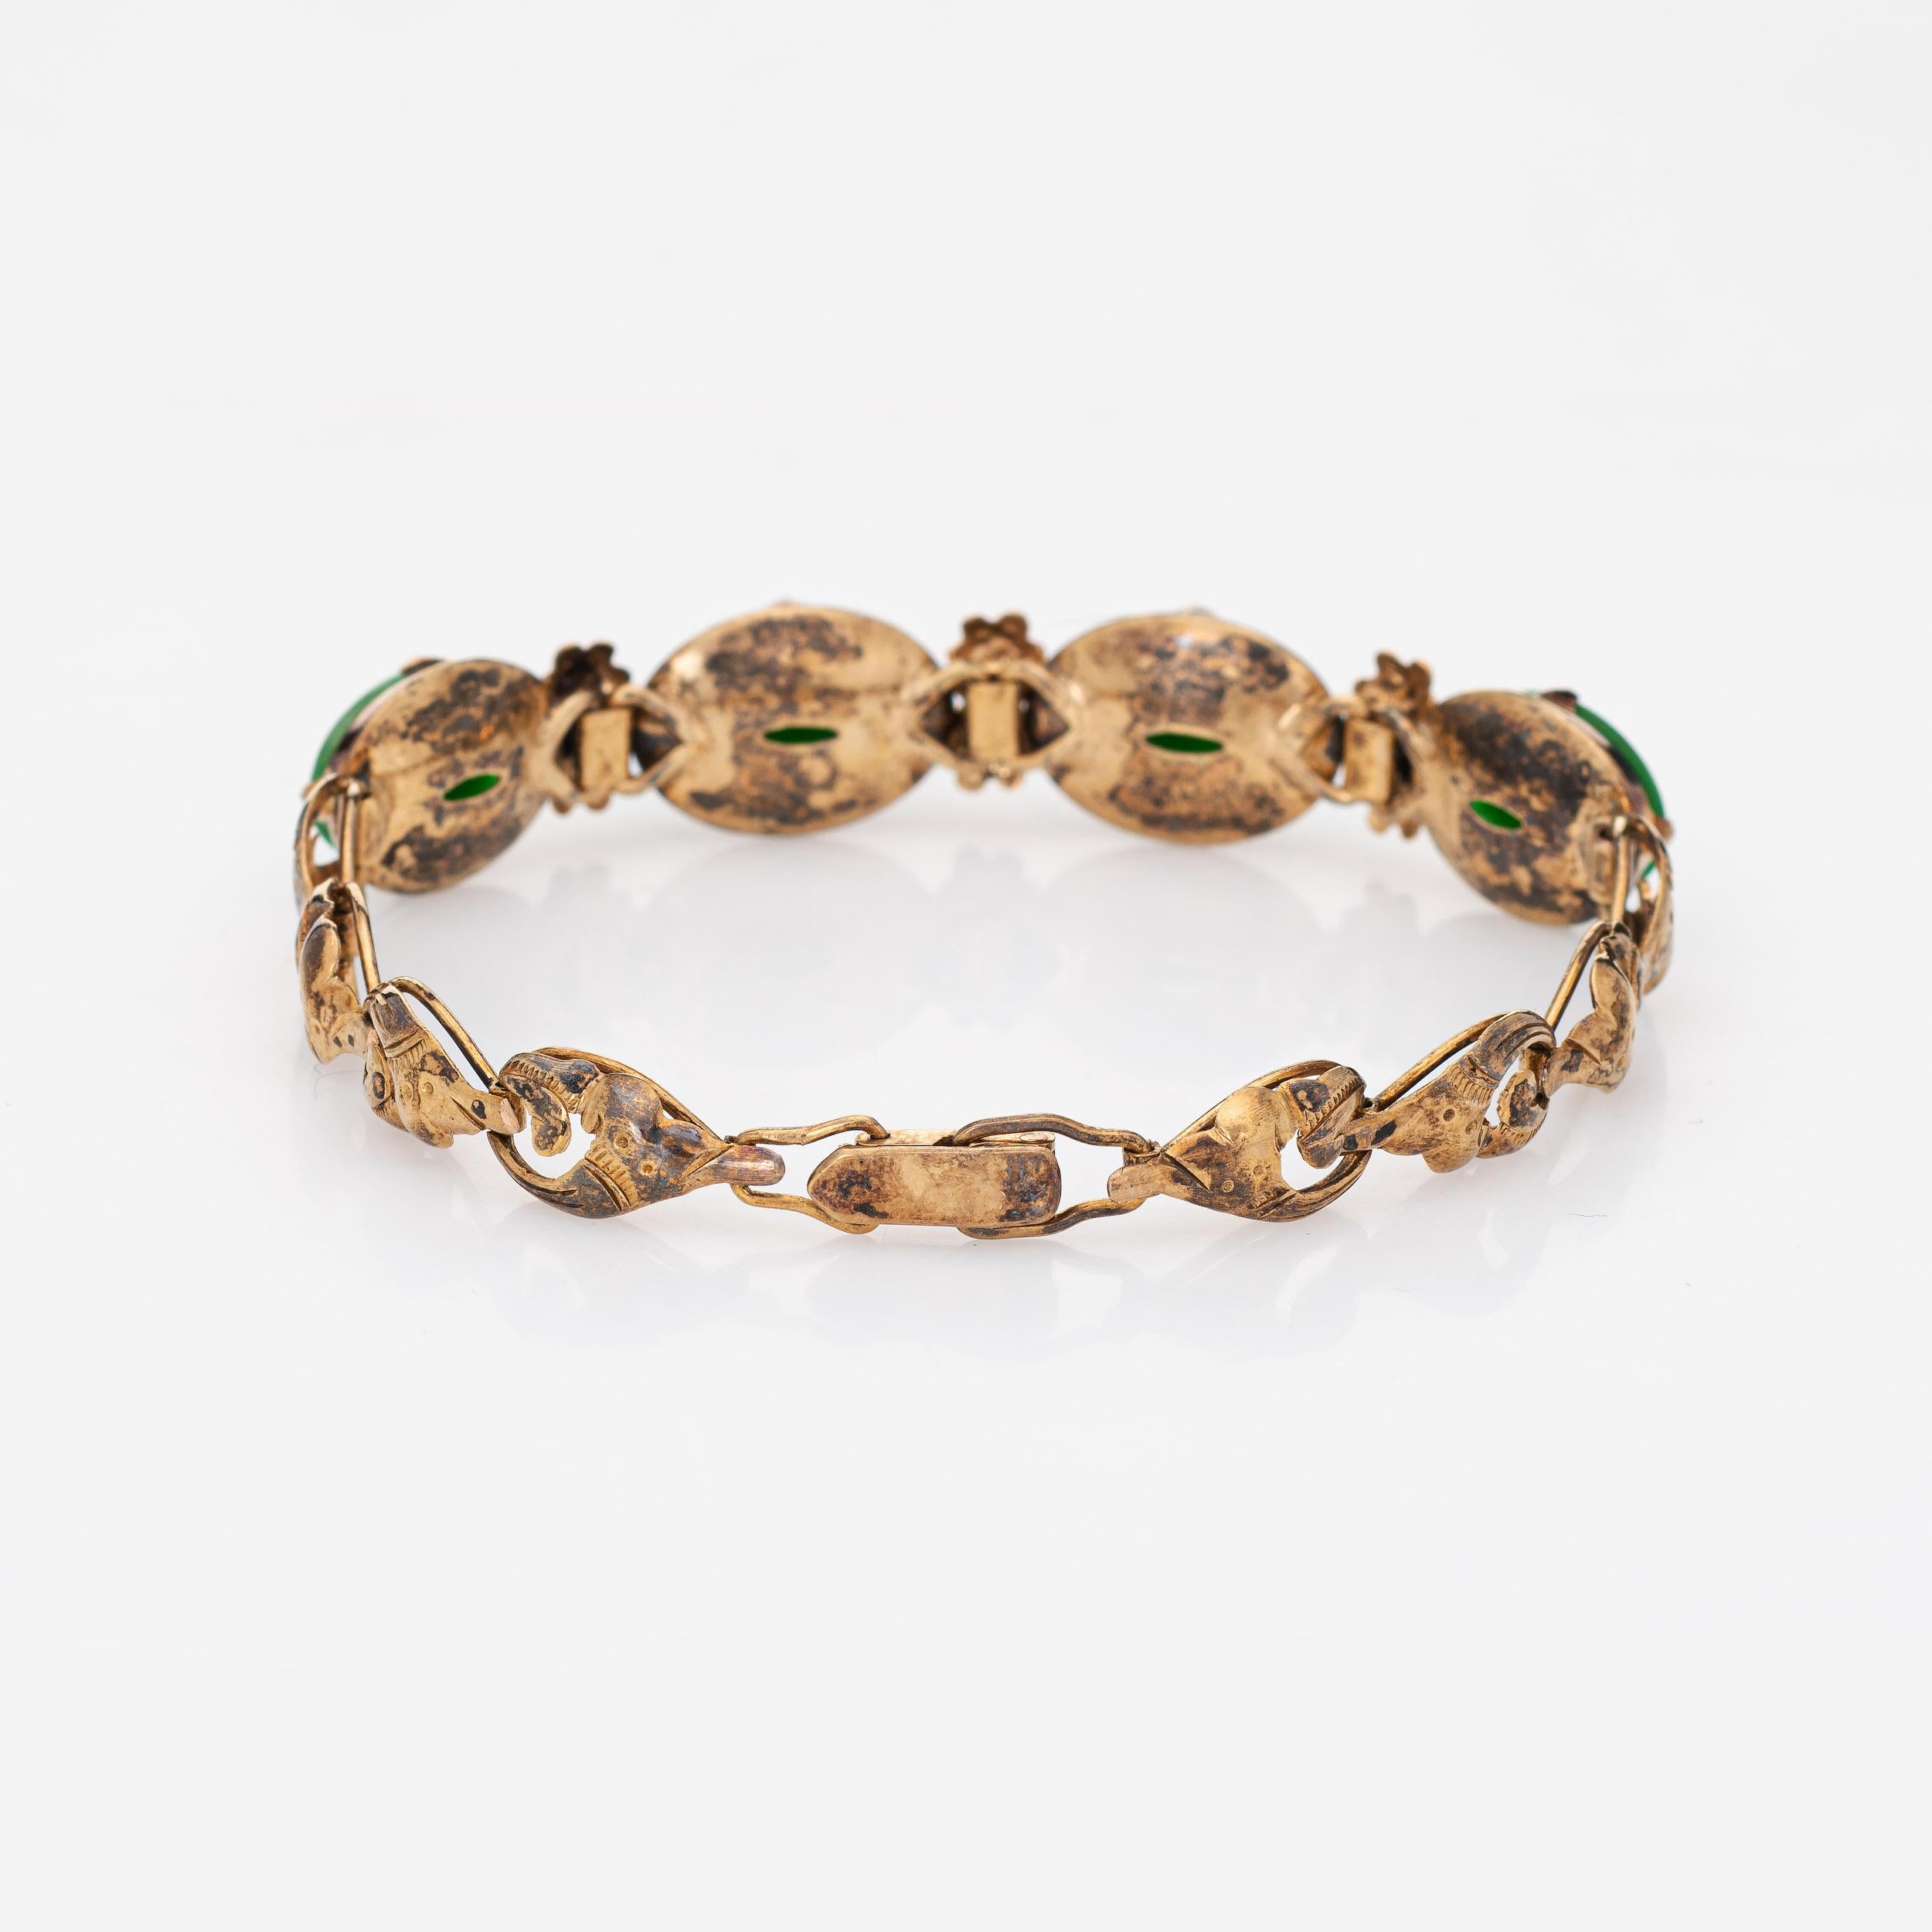 Stylish natural 'A' grade jadeite jade bracelet (circa 1940s to 1950s), crafted in 14k yellow gold. 

Four pieces of cabochon cut jadeite jade measure 12.20 x 8.90 x 1.90mm. The jade is in excellent condition and free of cracks or chips. The jade is